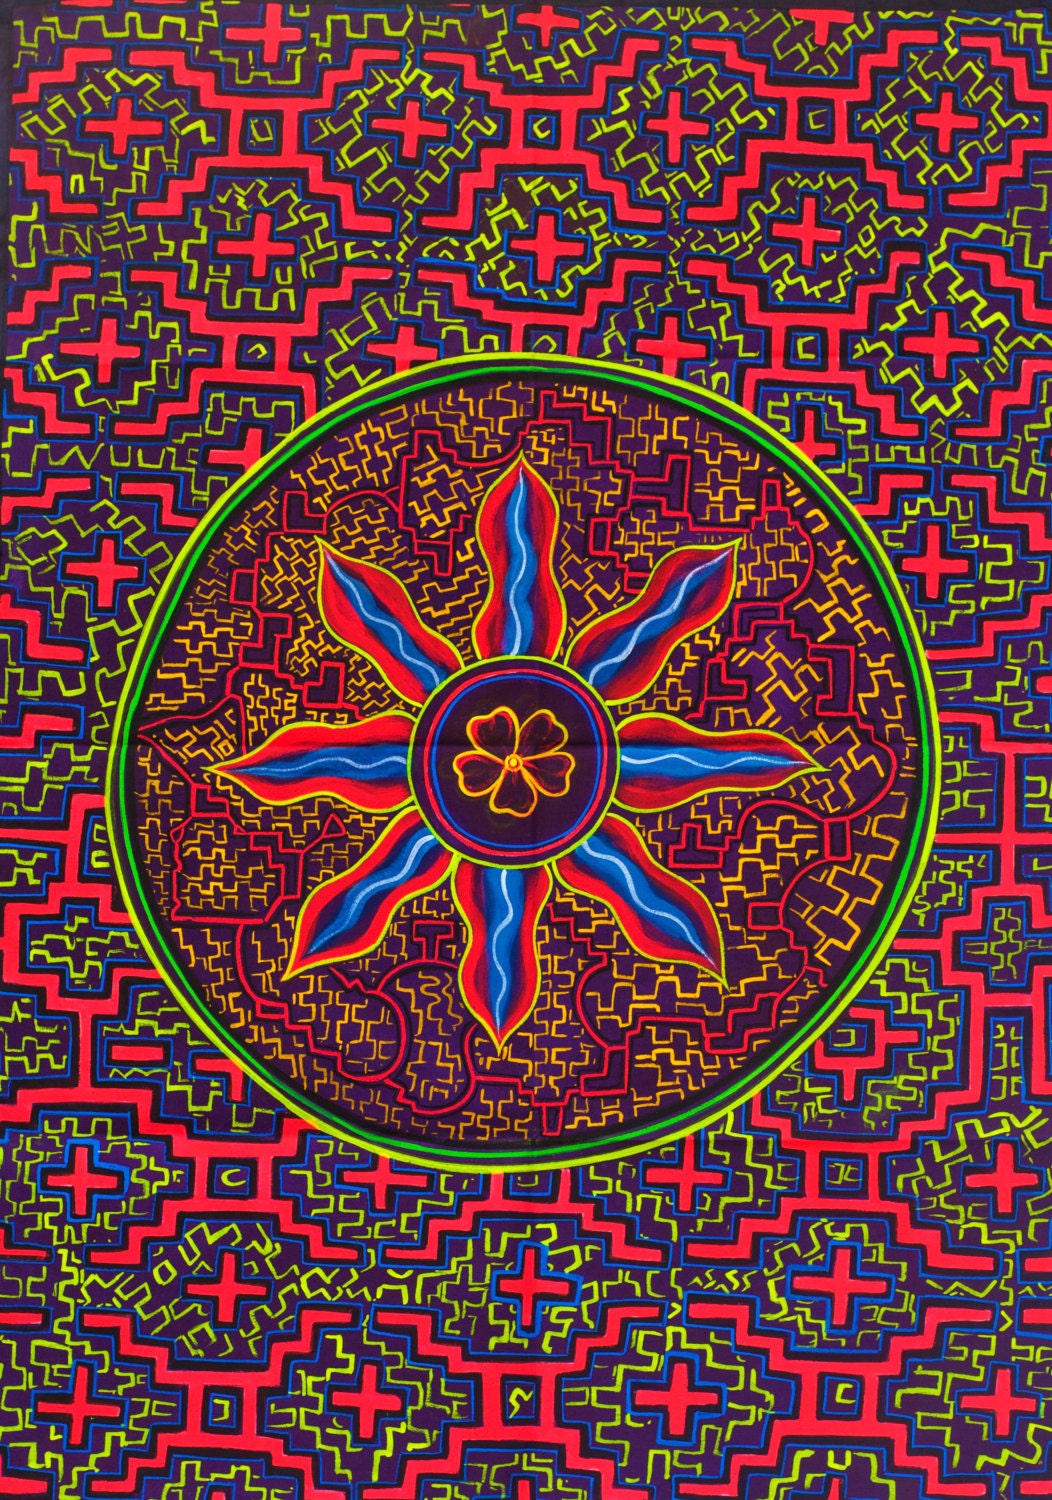 Ayahuasca Flower UV Painting - 90x60cm - handmade on order - fully blacklight glowing colors - psychedelic dmt visionary artwork